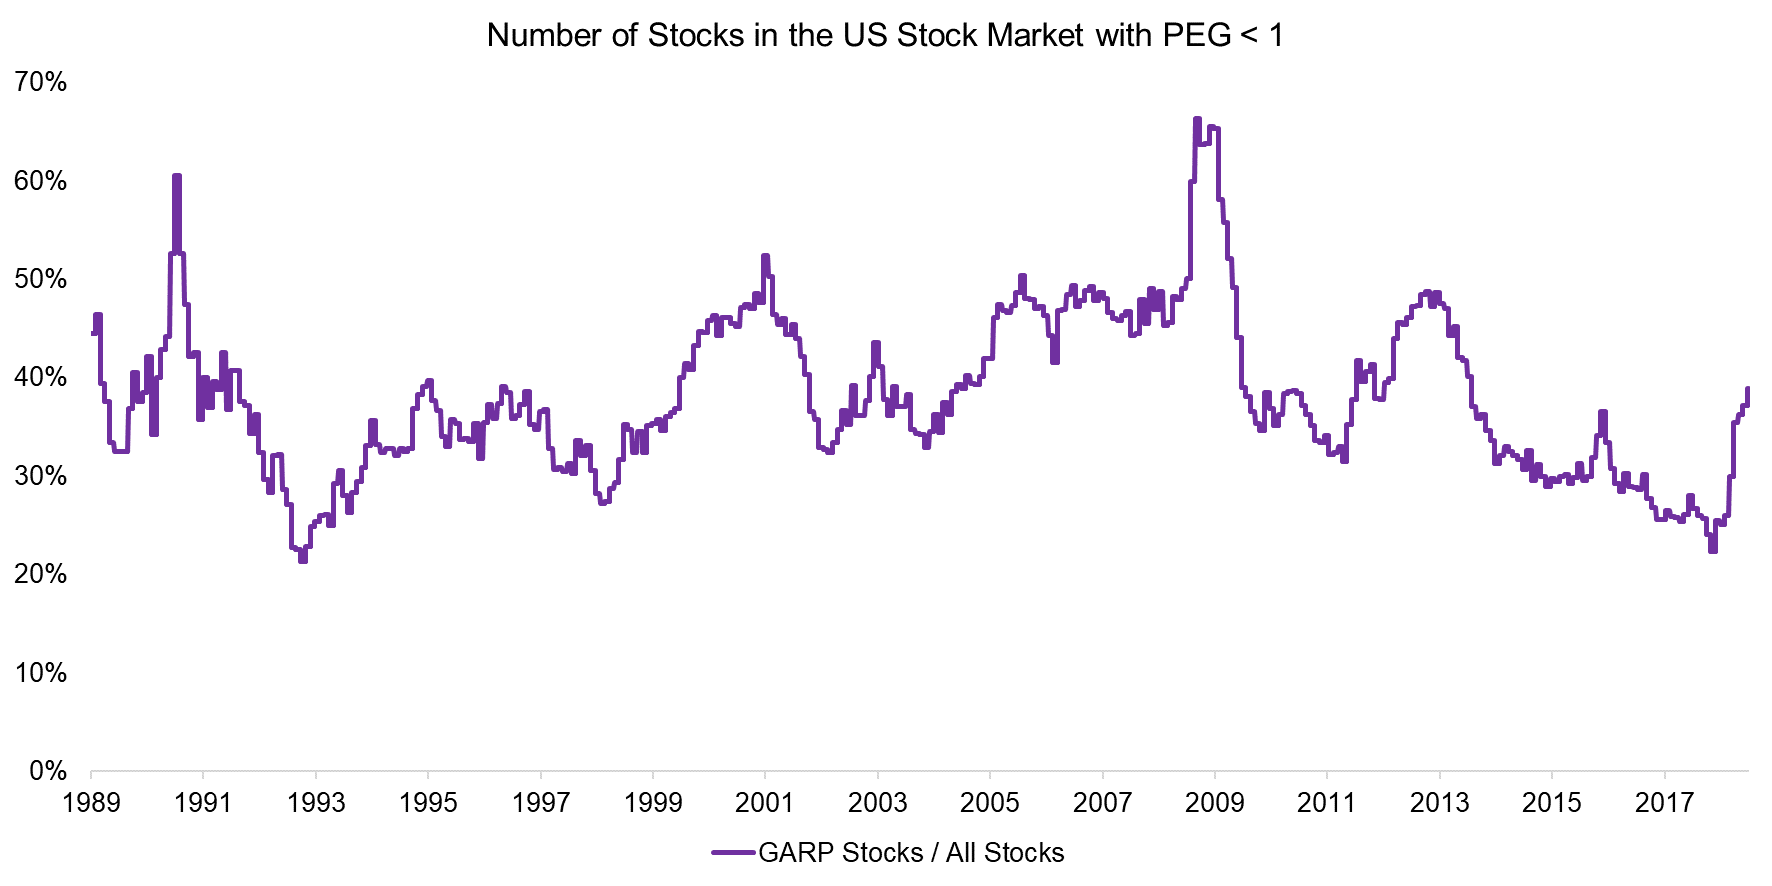 Number of Stocks in the US Stock Market with PEG 1